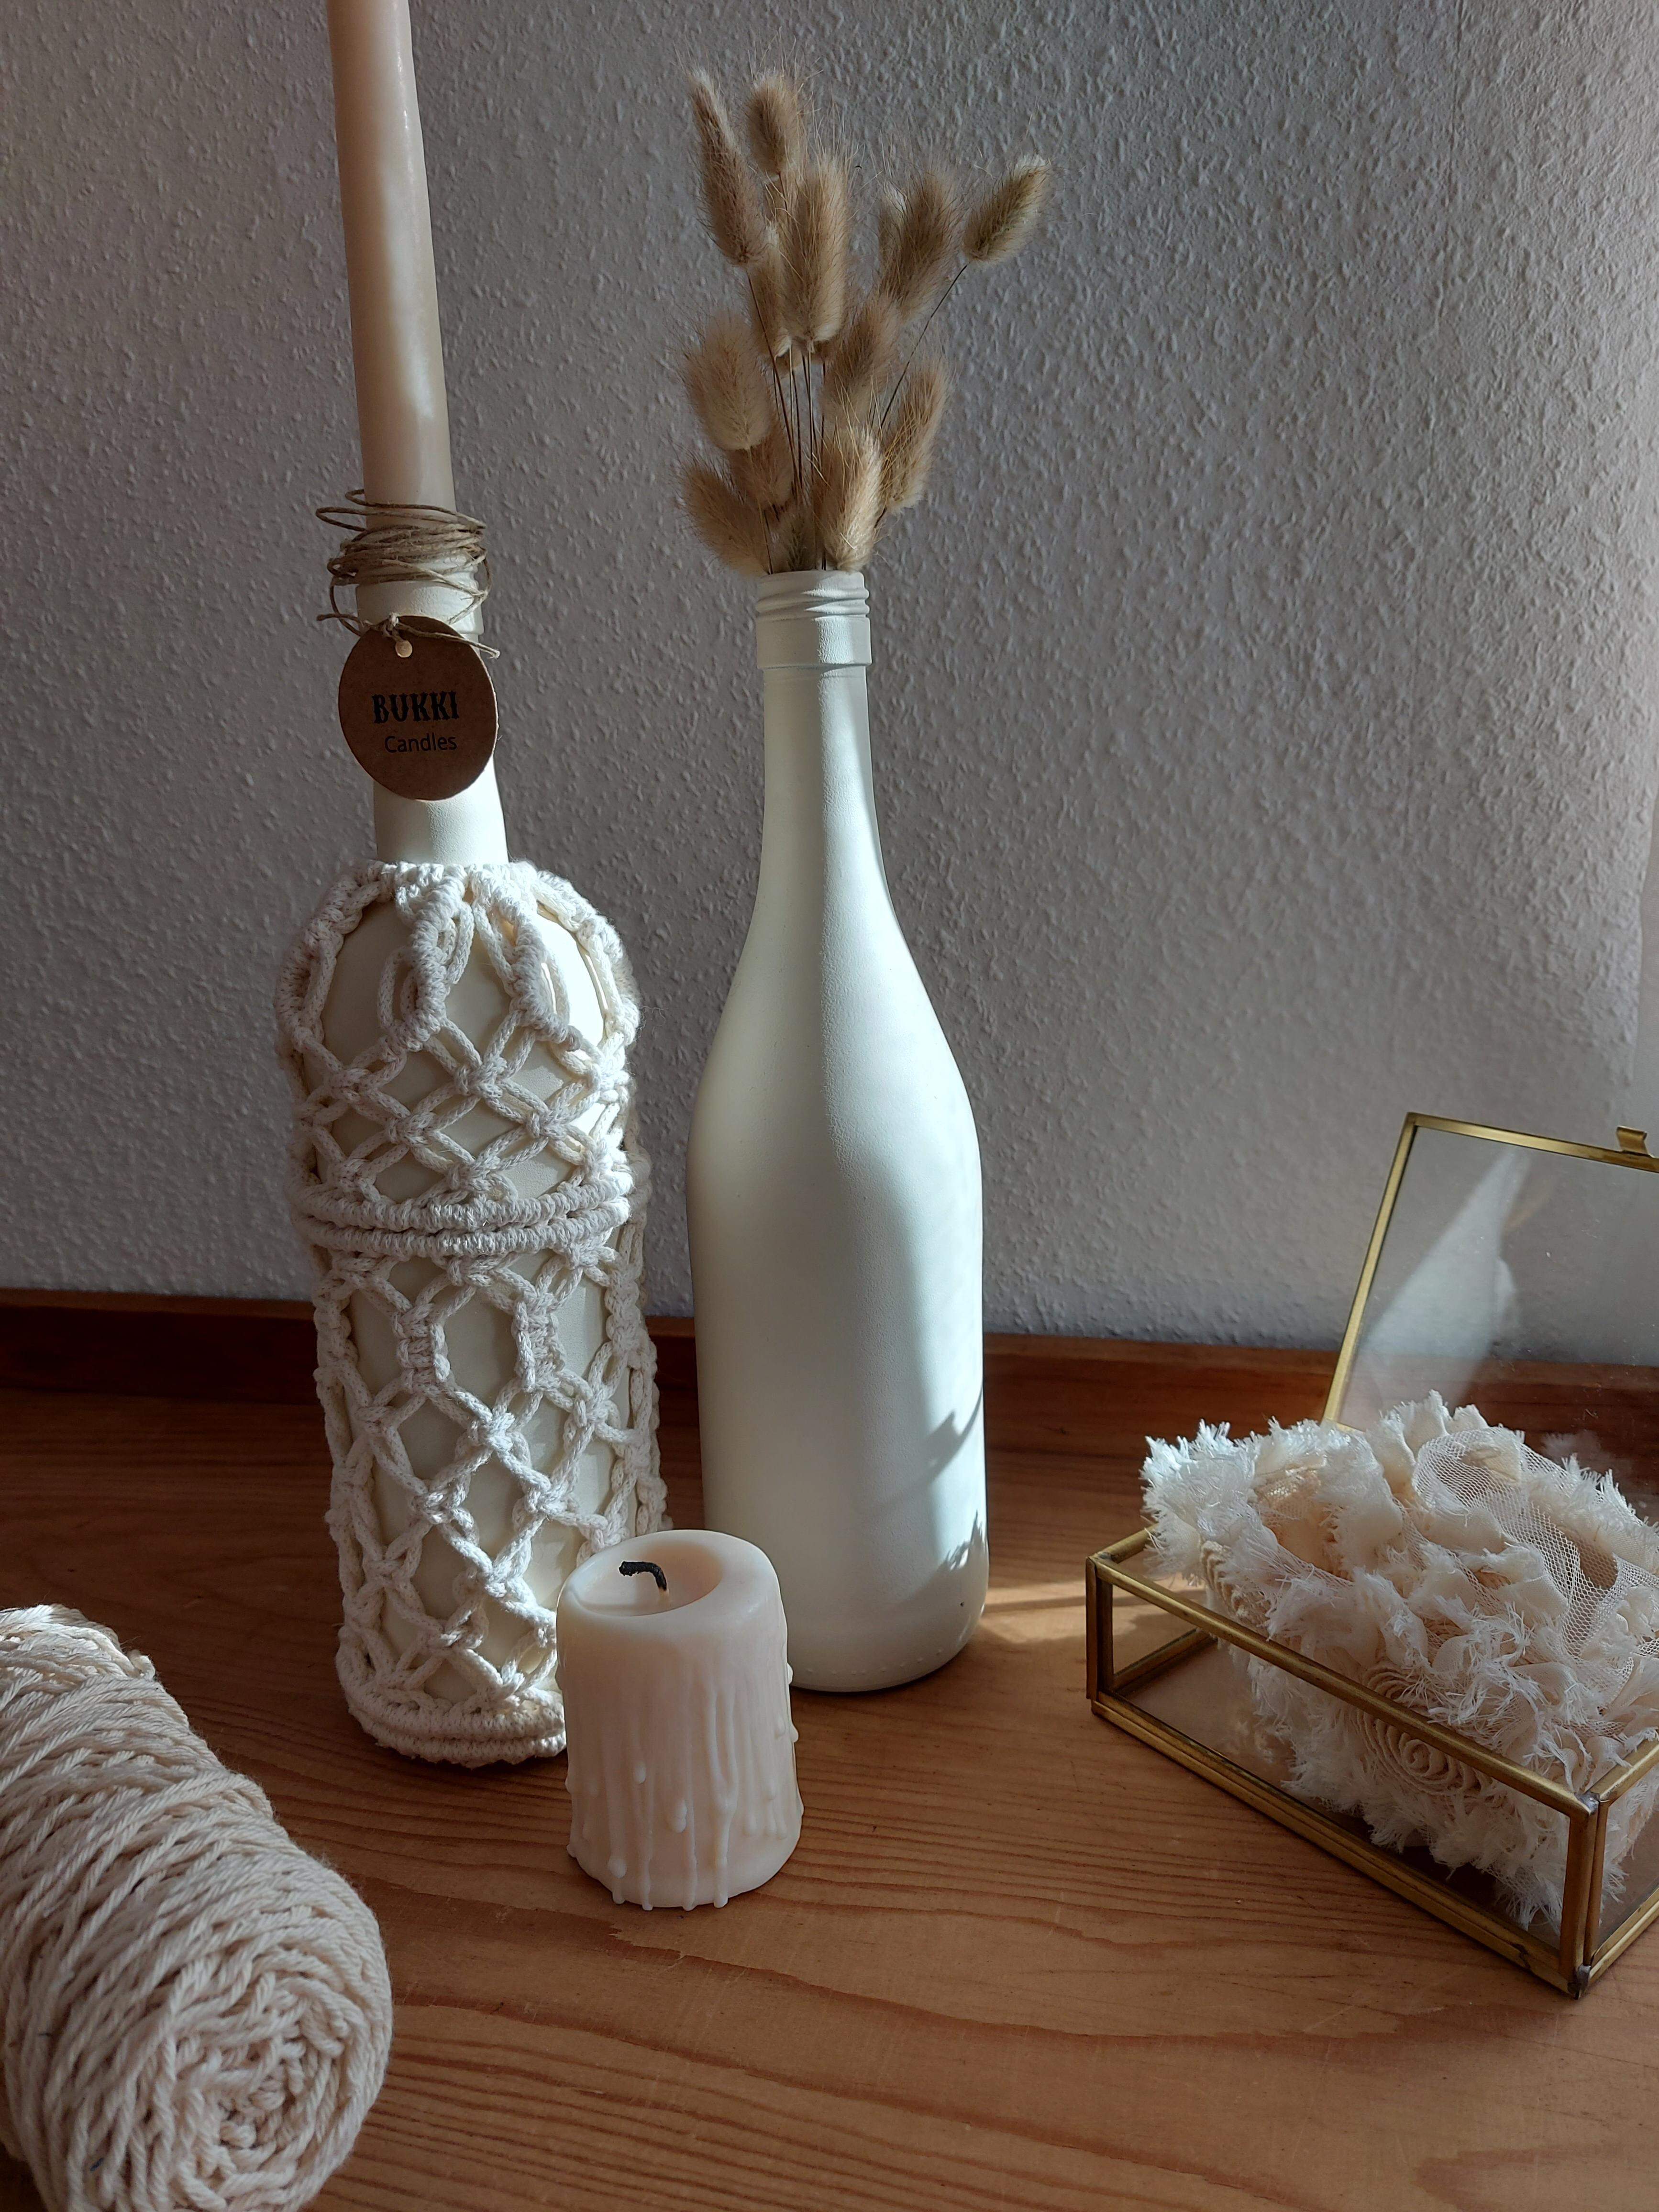 NMW MACRAME PAINTED BOTTLE